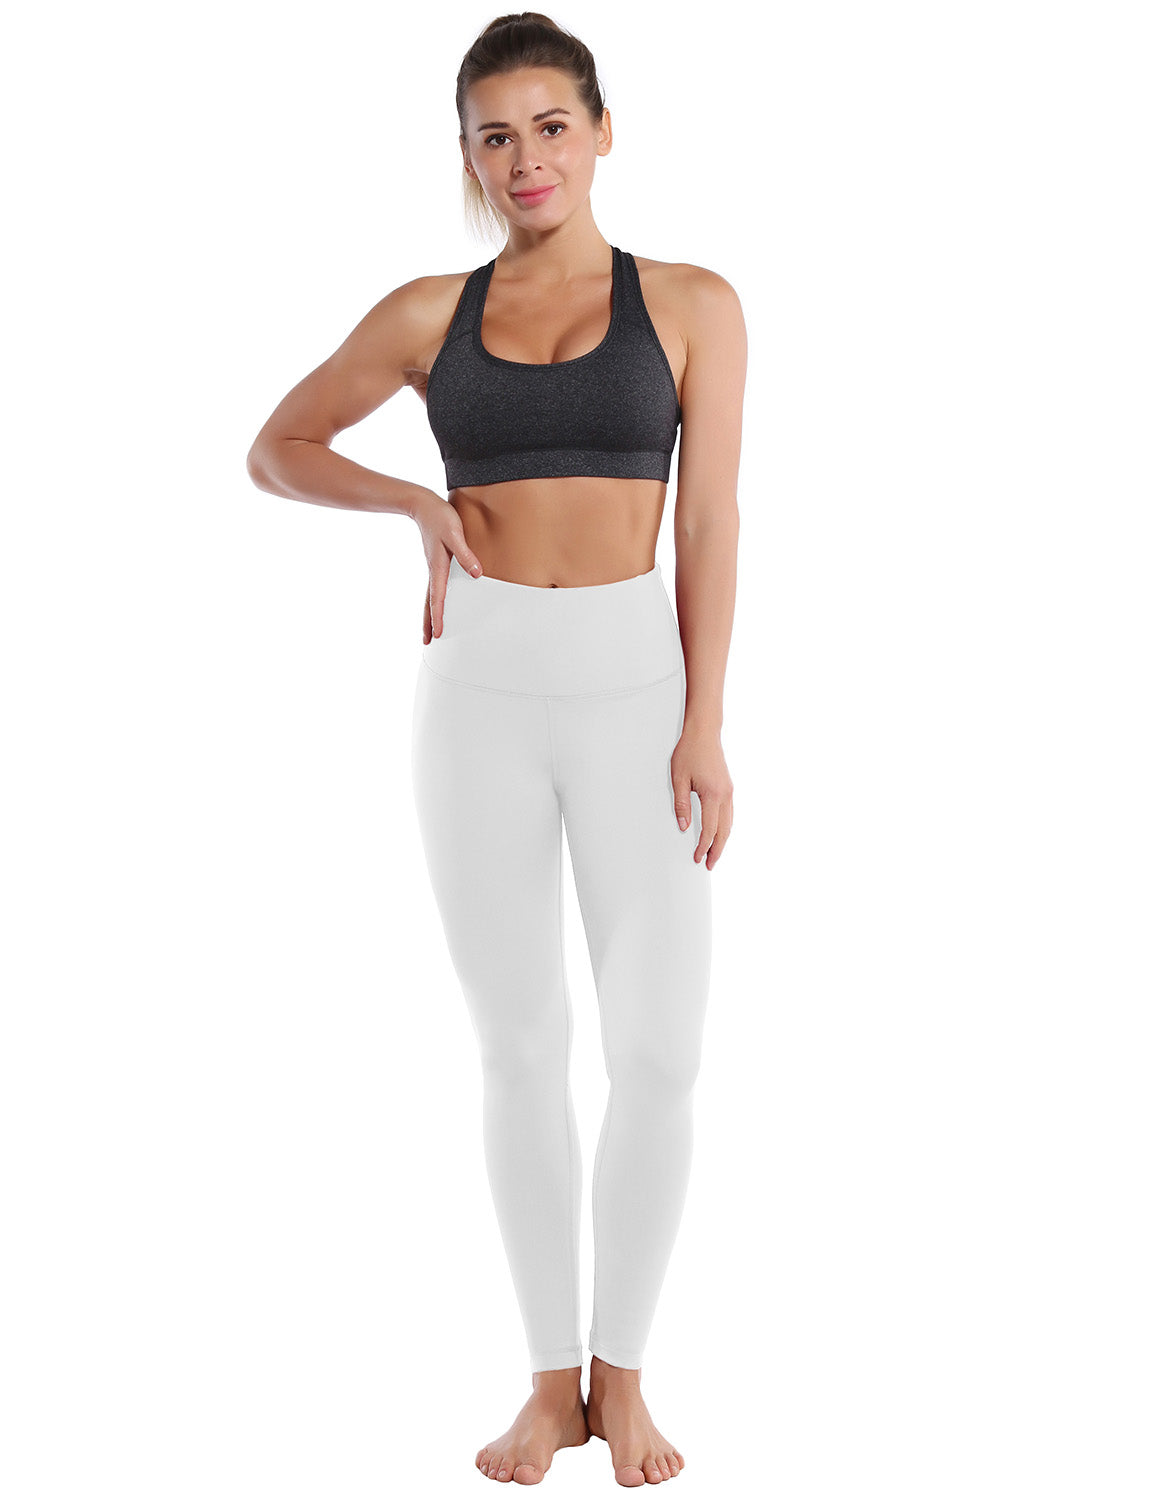 High Waist Running Pants white 75%Nylon/25%Spandex Fabric doesn't attract lint easily 4-way stretch No see-through Moisture-wicking Tummy control Inner pocket Four lengths